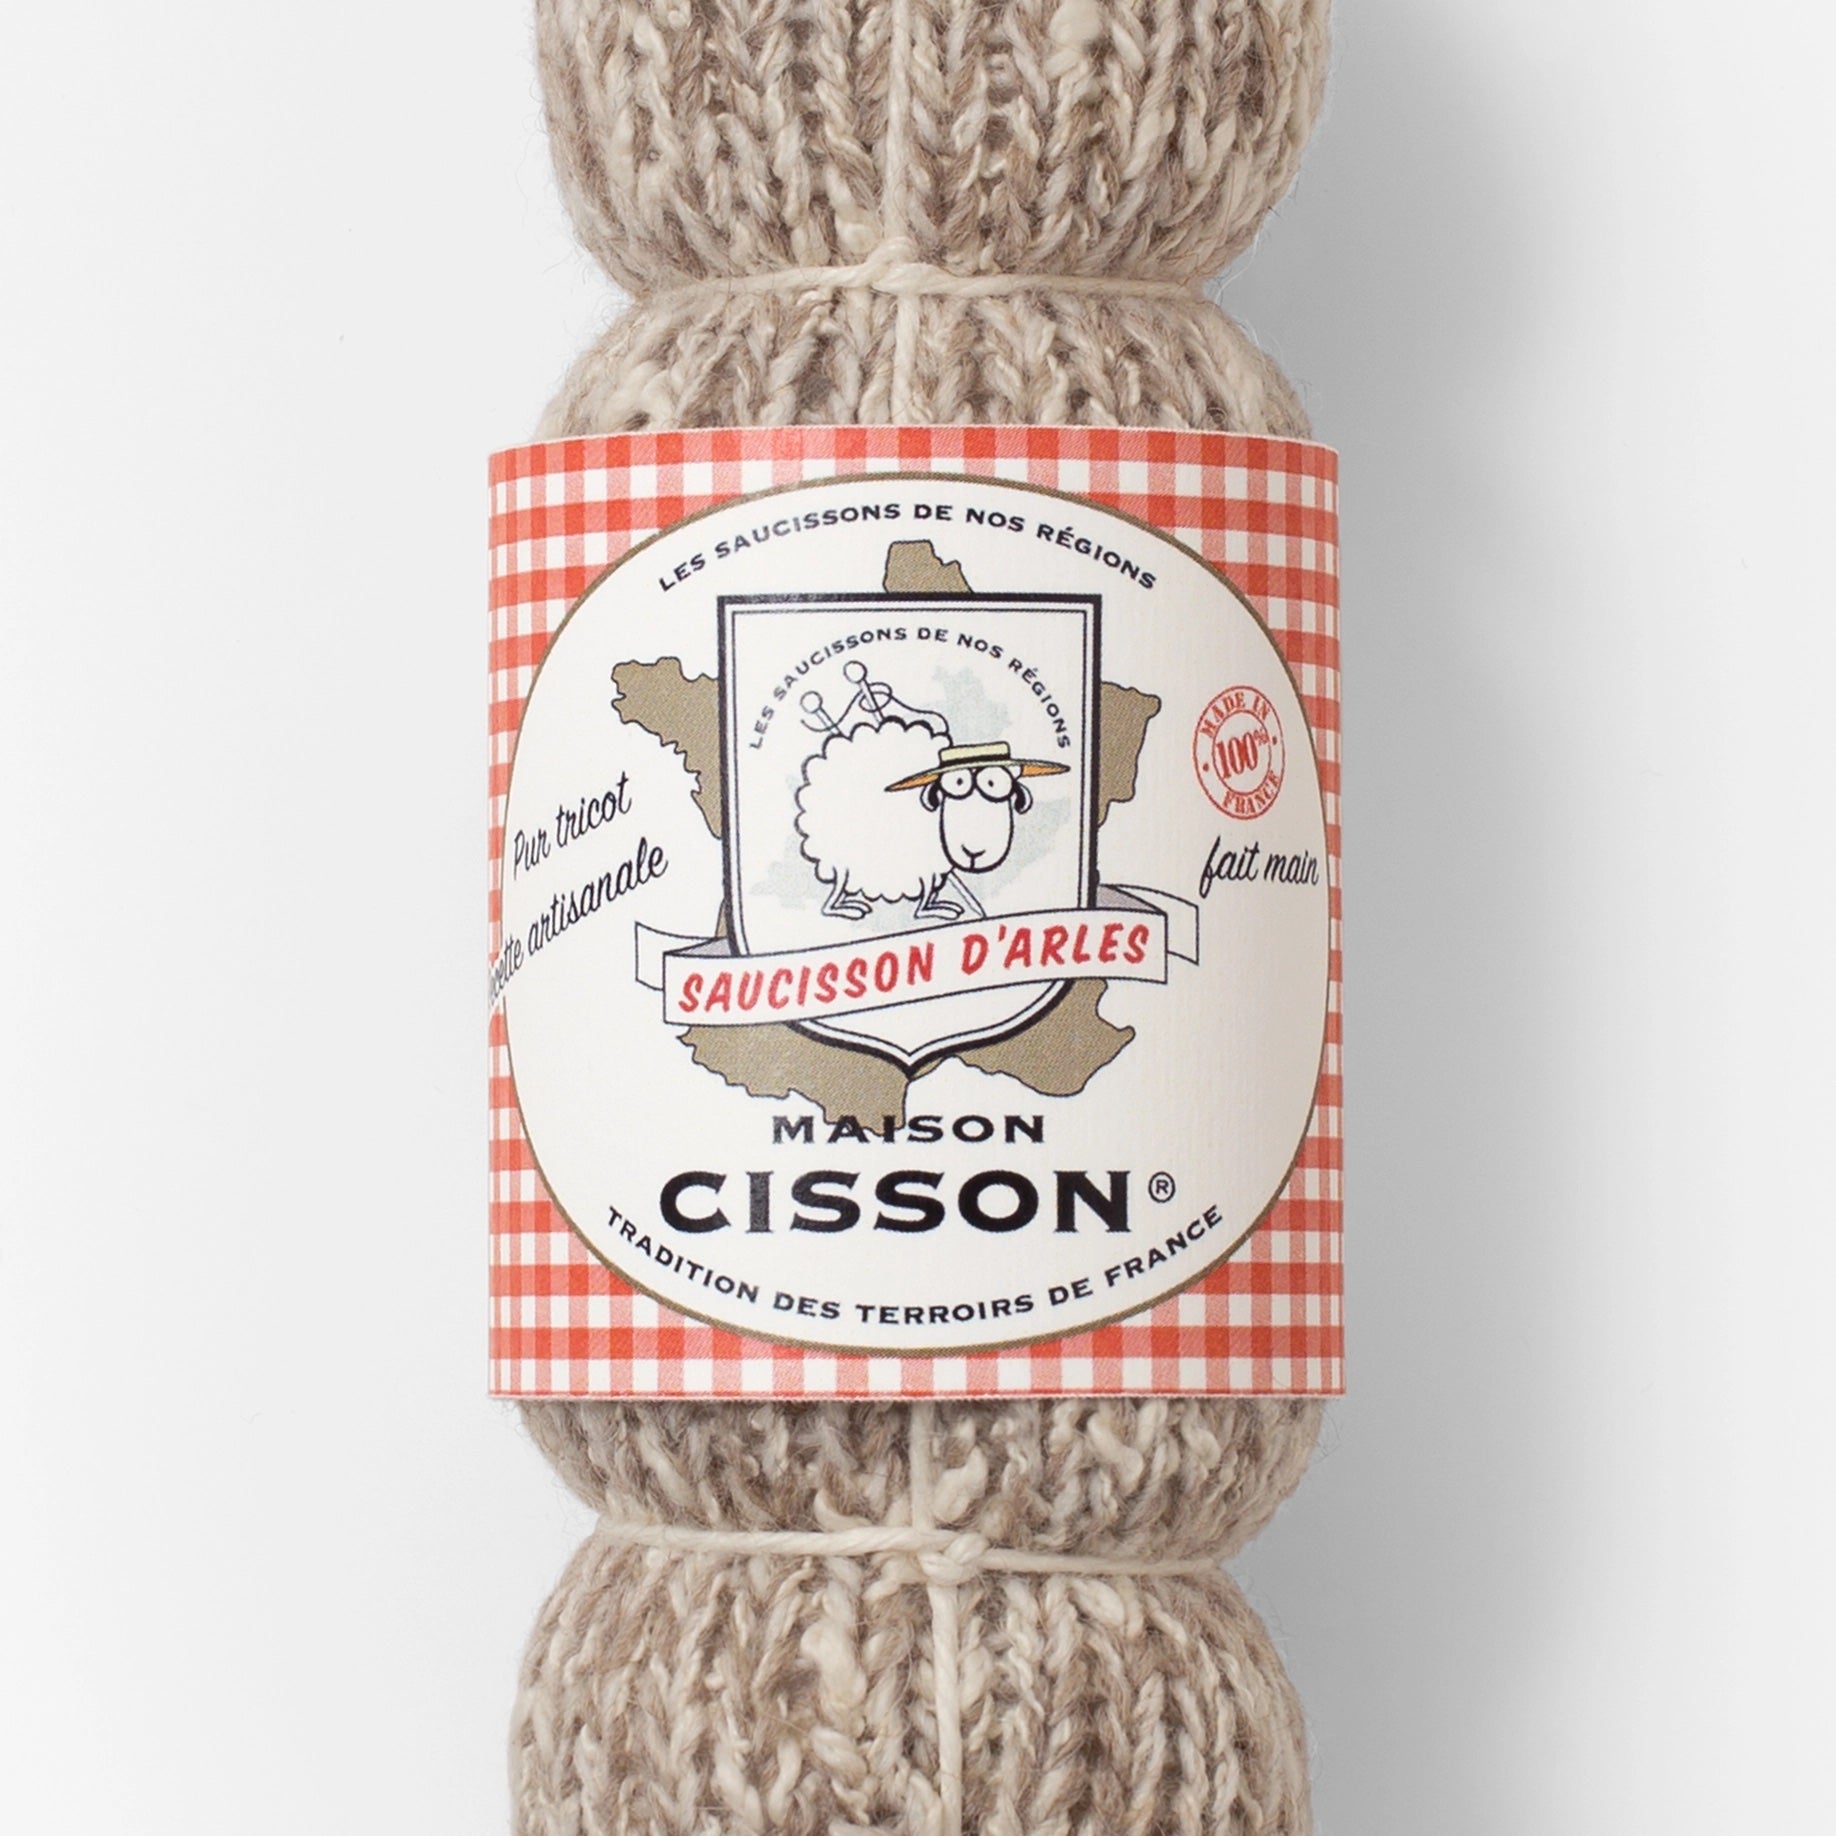 Knitted “Arles Sausage” by Maison Cisson